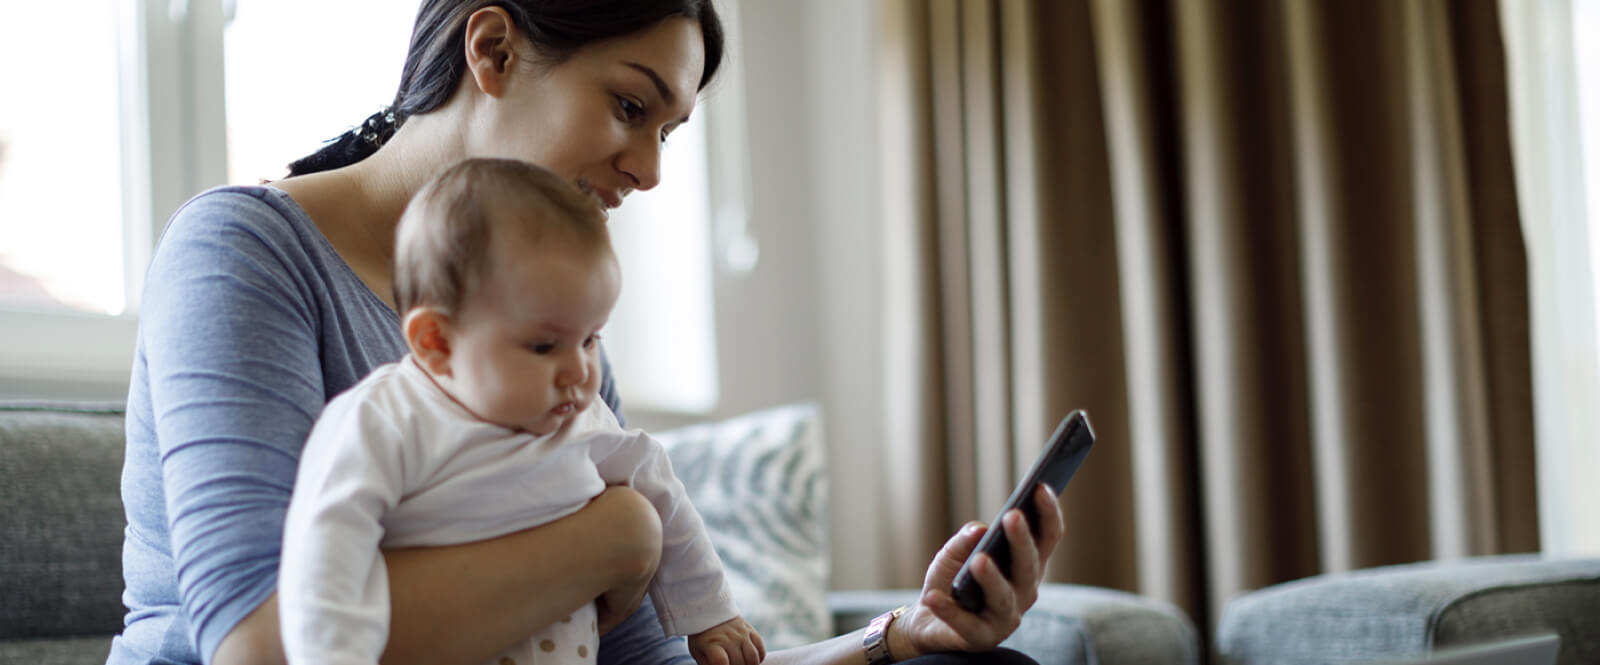 Young woman holding an infant and looking at a smartphone